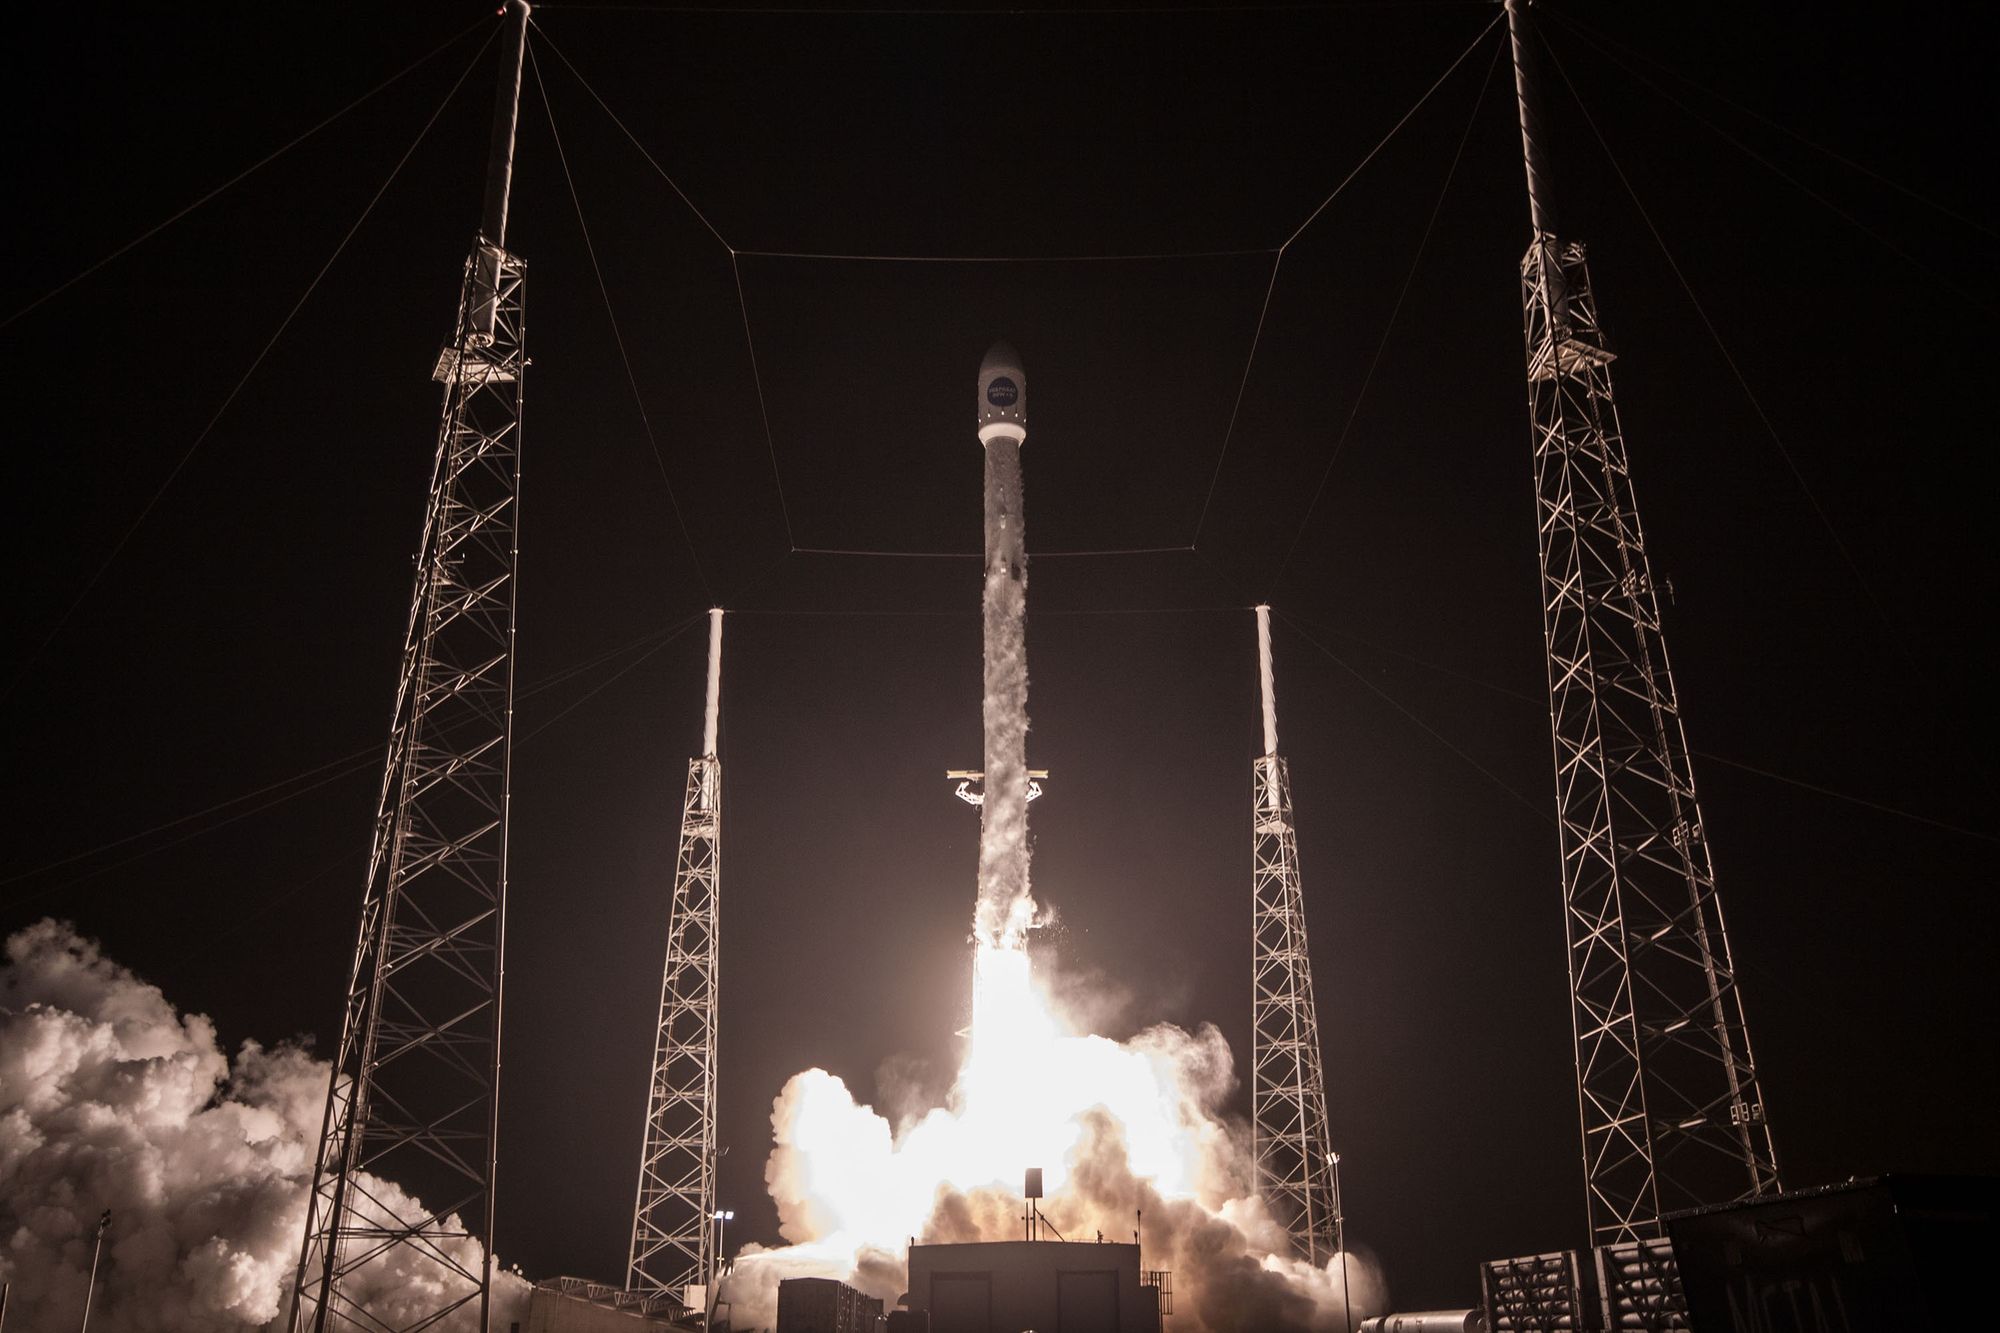 Our Top 5 SpaceX launches of the Past 50